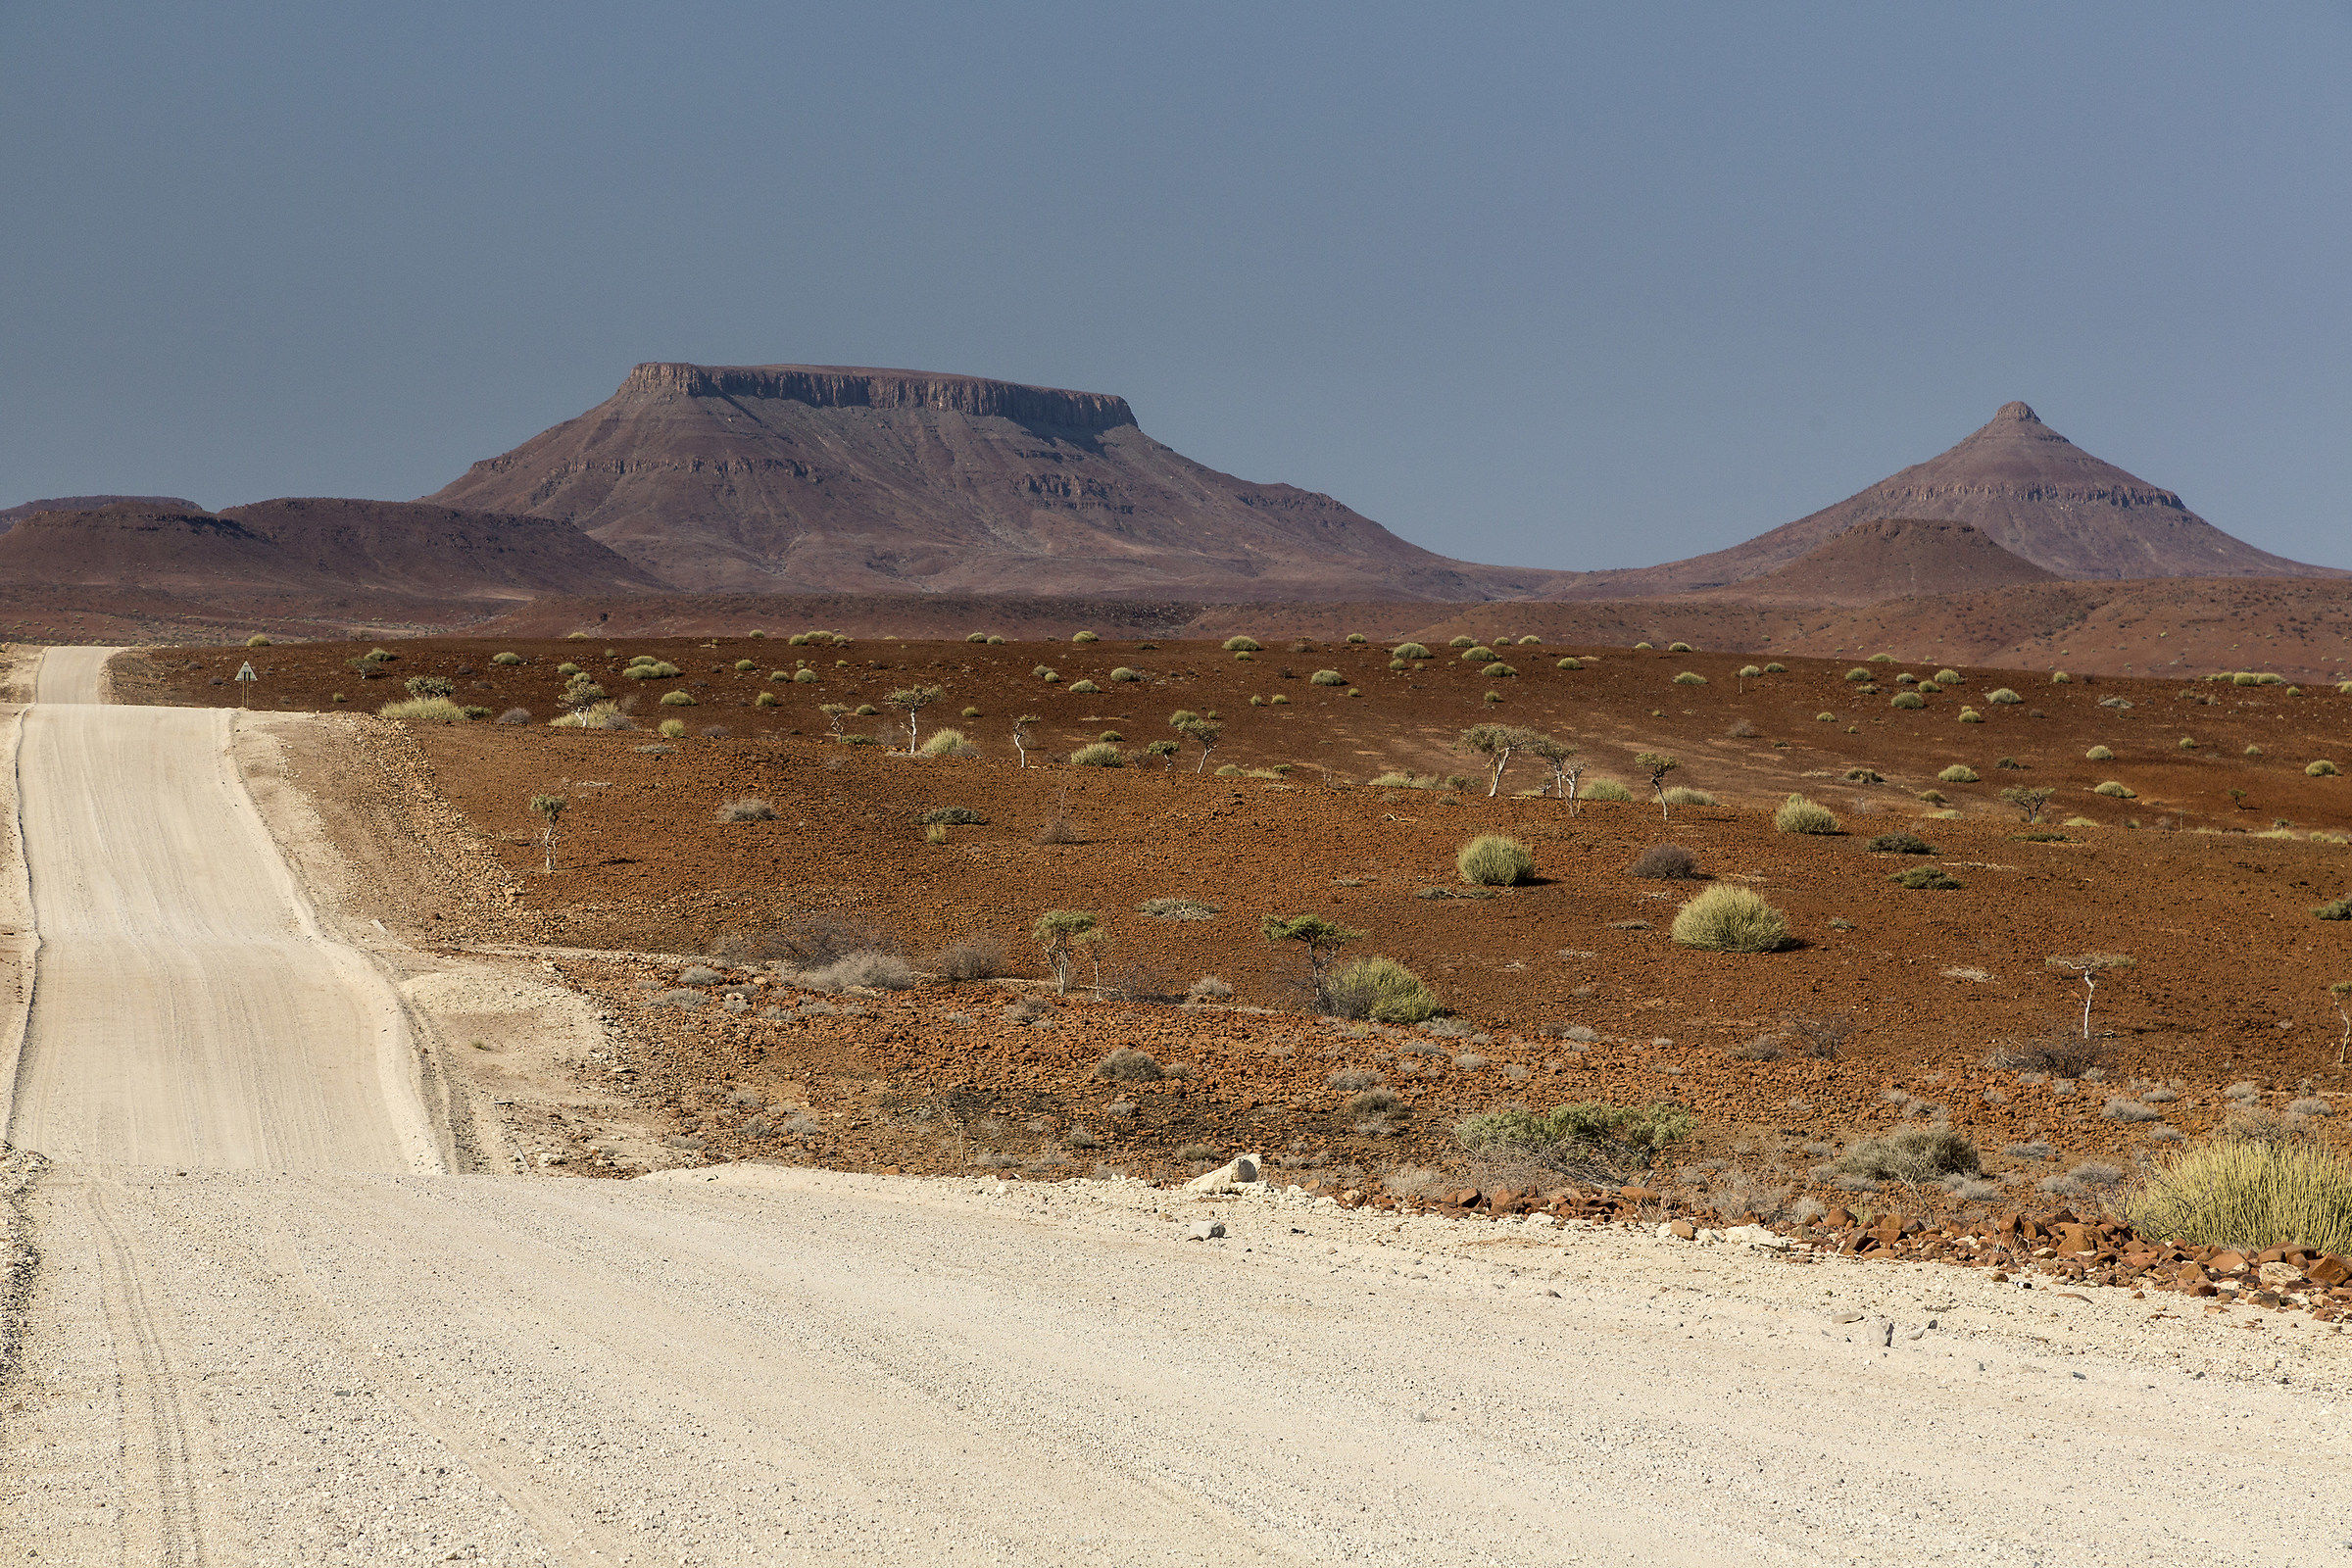 On the roads of Namibia...